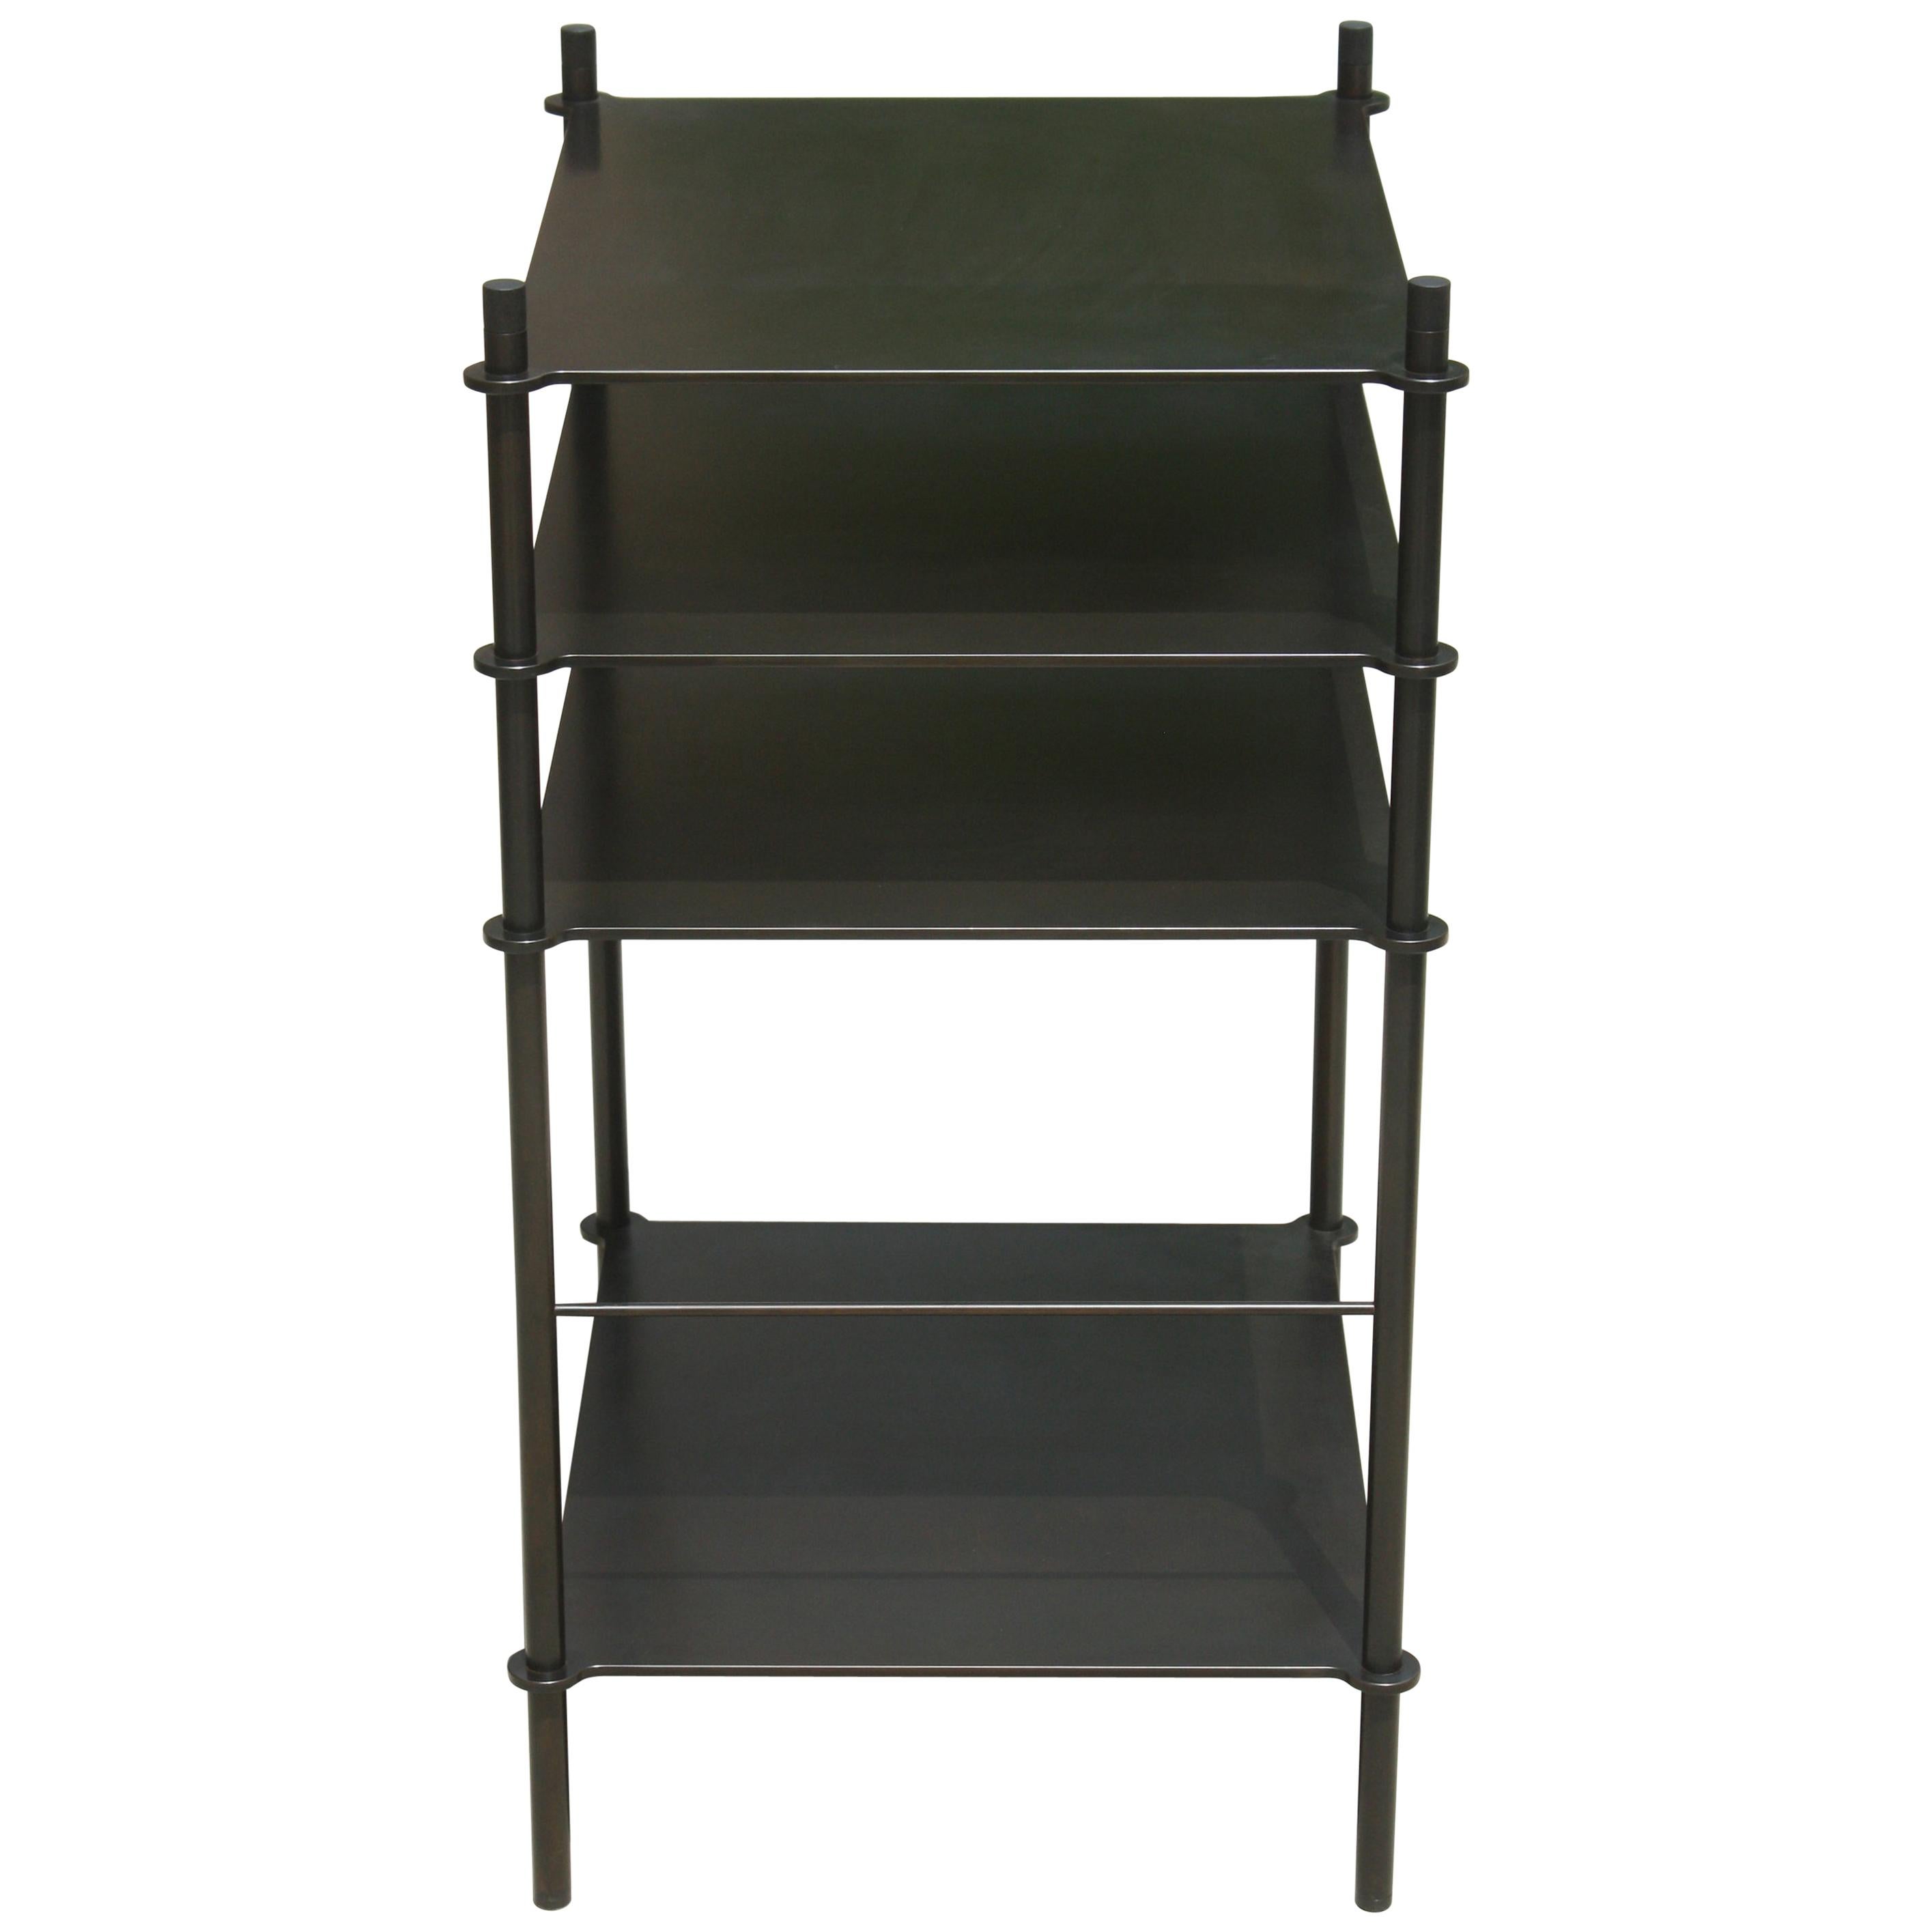 Mezzo Customizable Side Table Shelving or Console Table in Handcrafted Metal